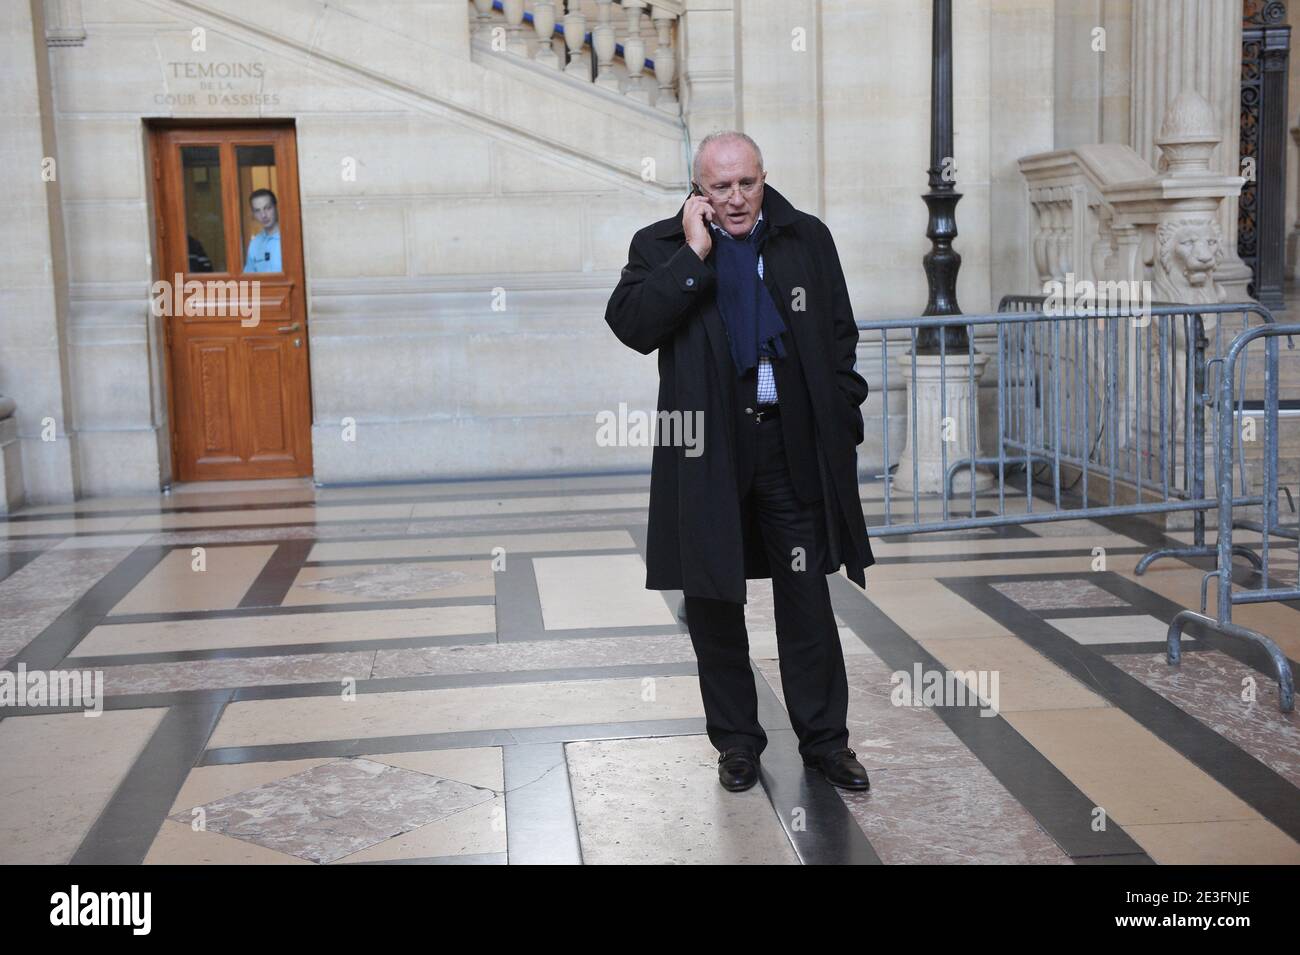 Yvan Colonna's laywers Antoine Sollacaro at the Paris courthouse, France, on March 16, 2009. Antoine Sollacaro refuses to appear again in protest against the refusal of the court to hold a reconstitution of the murder of Erignac in Ajaccio, Corsica. Photo by Mousse/ABACAPRESS.COM Stock Photo